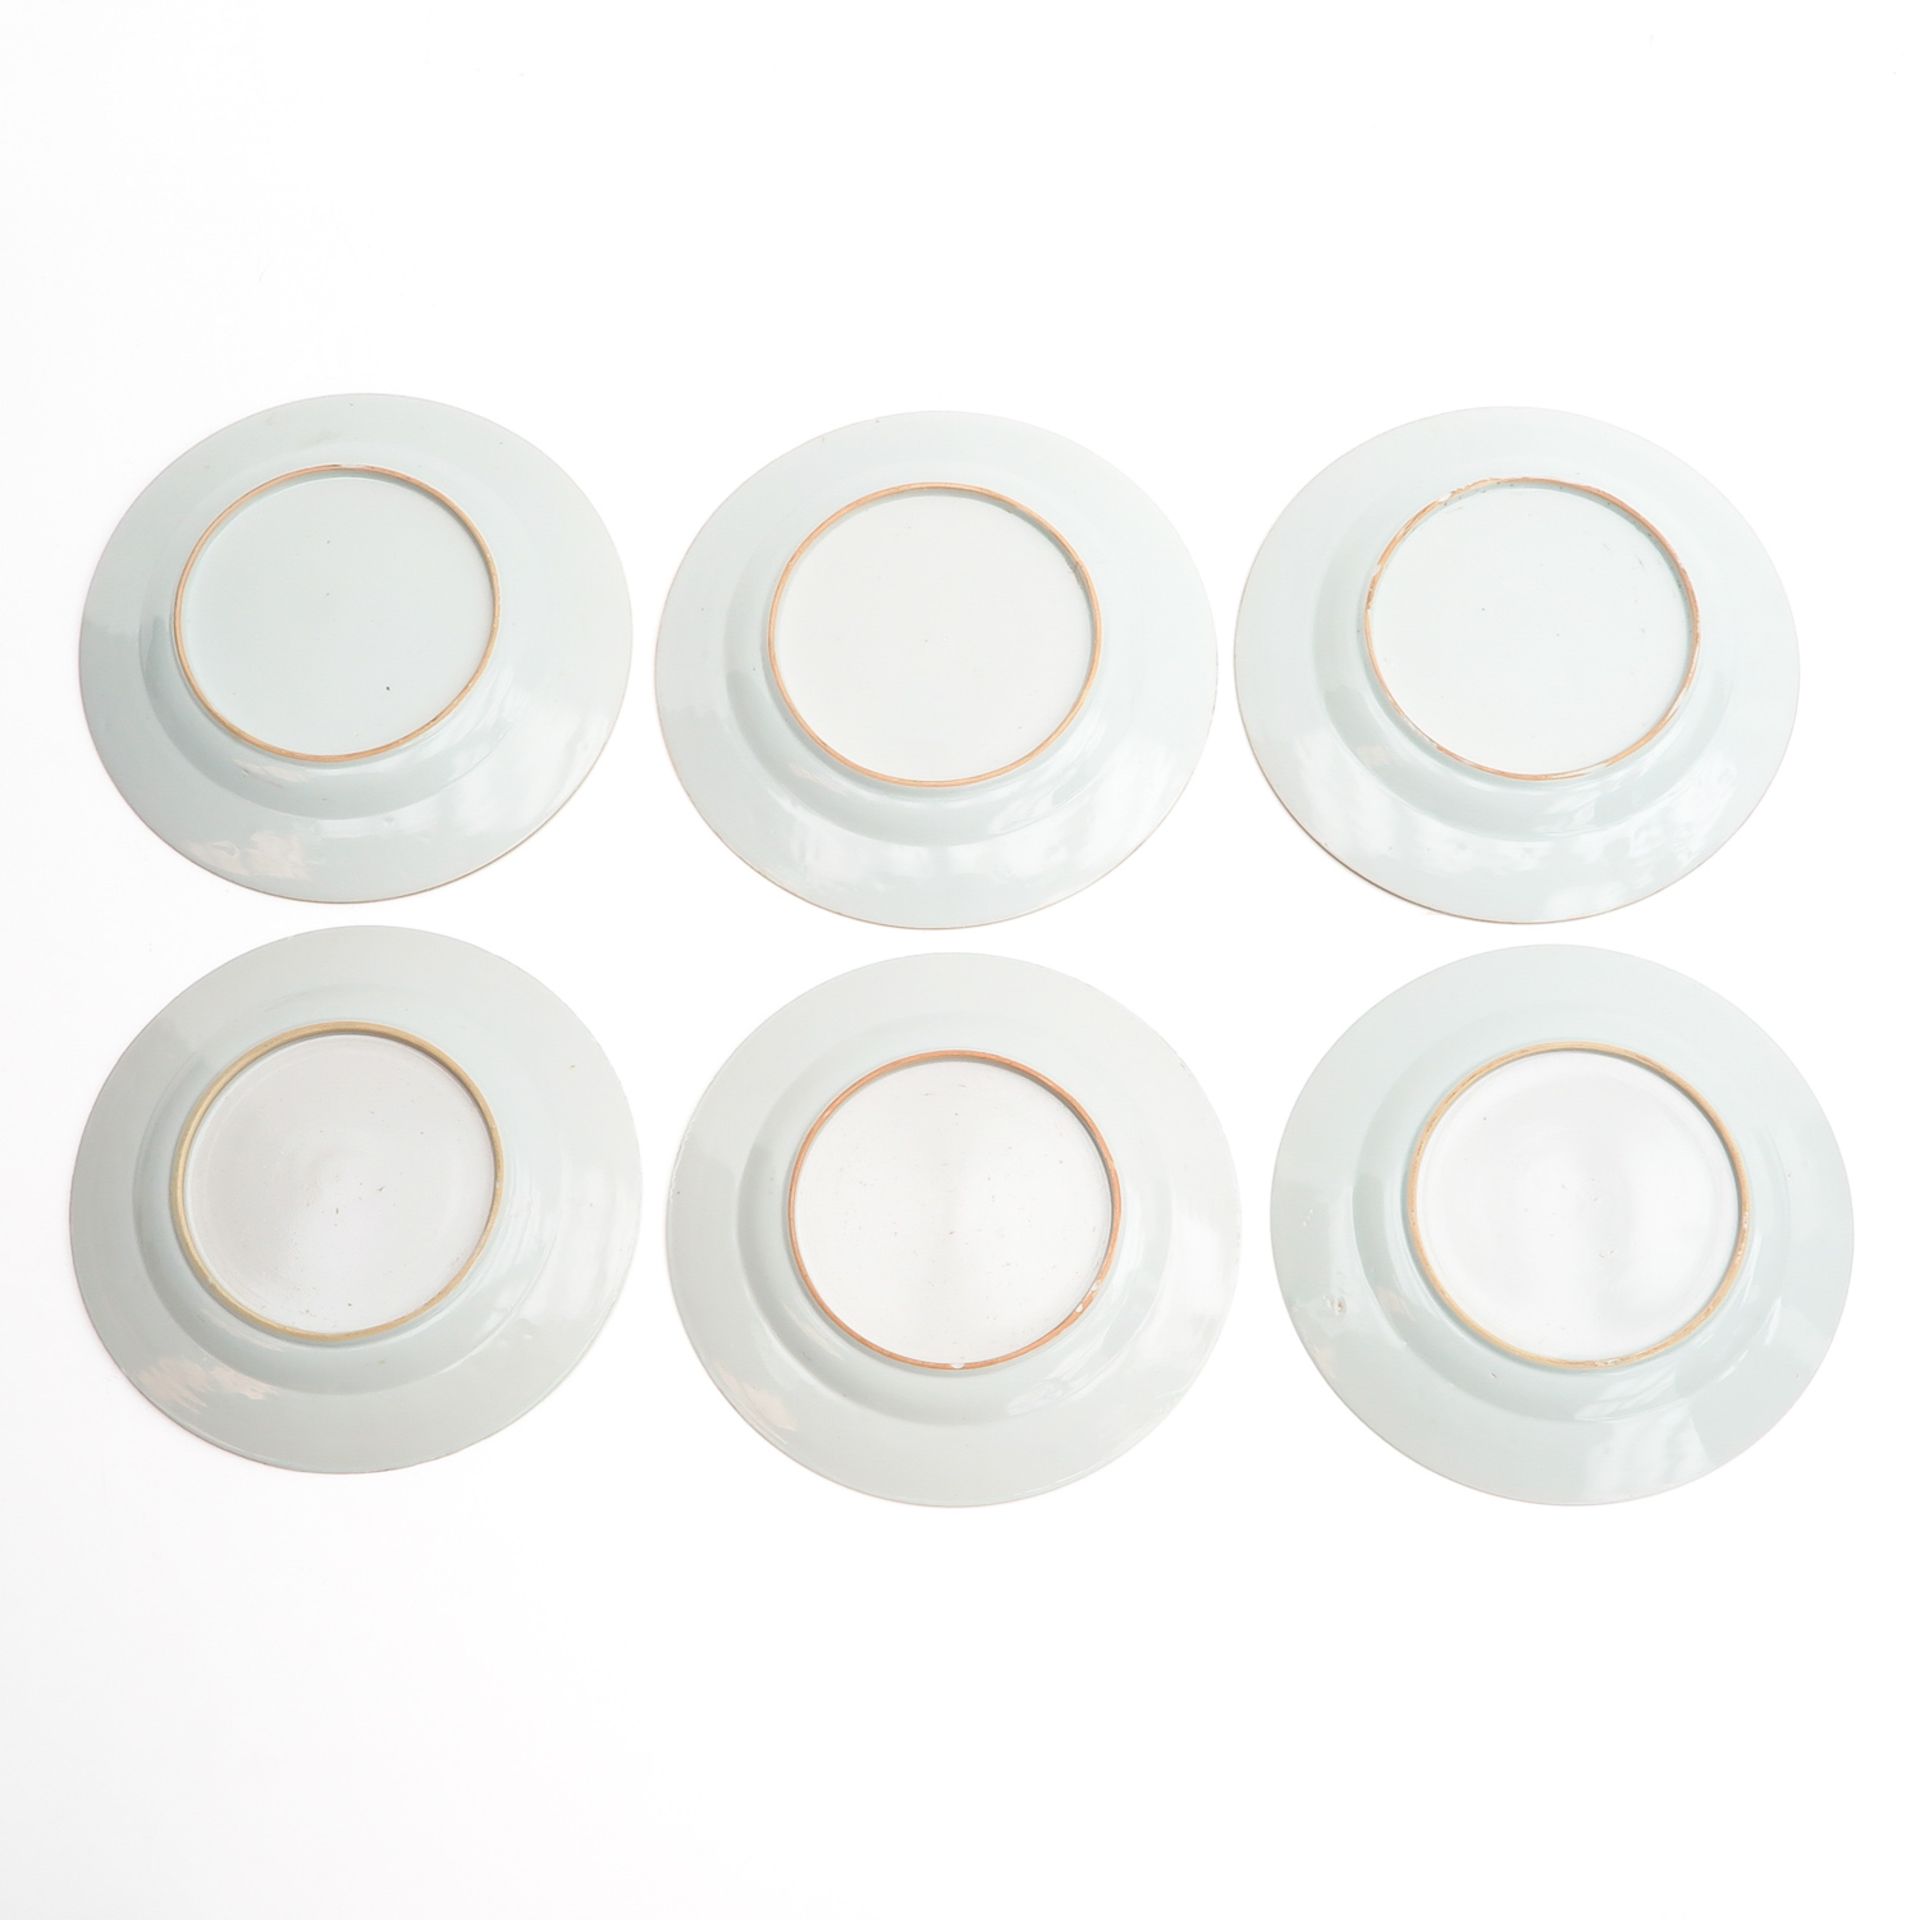 A Series of 6 Blue and White Plates - Image 2 of 10